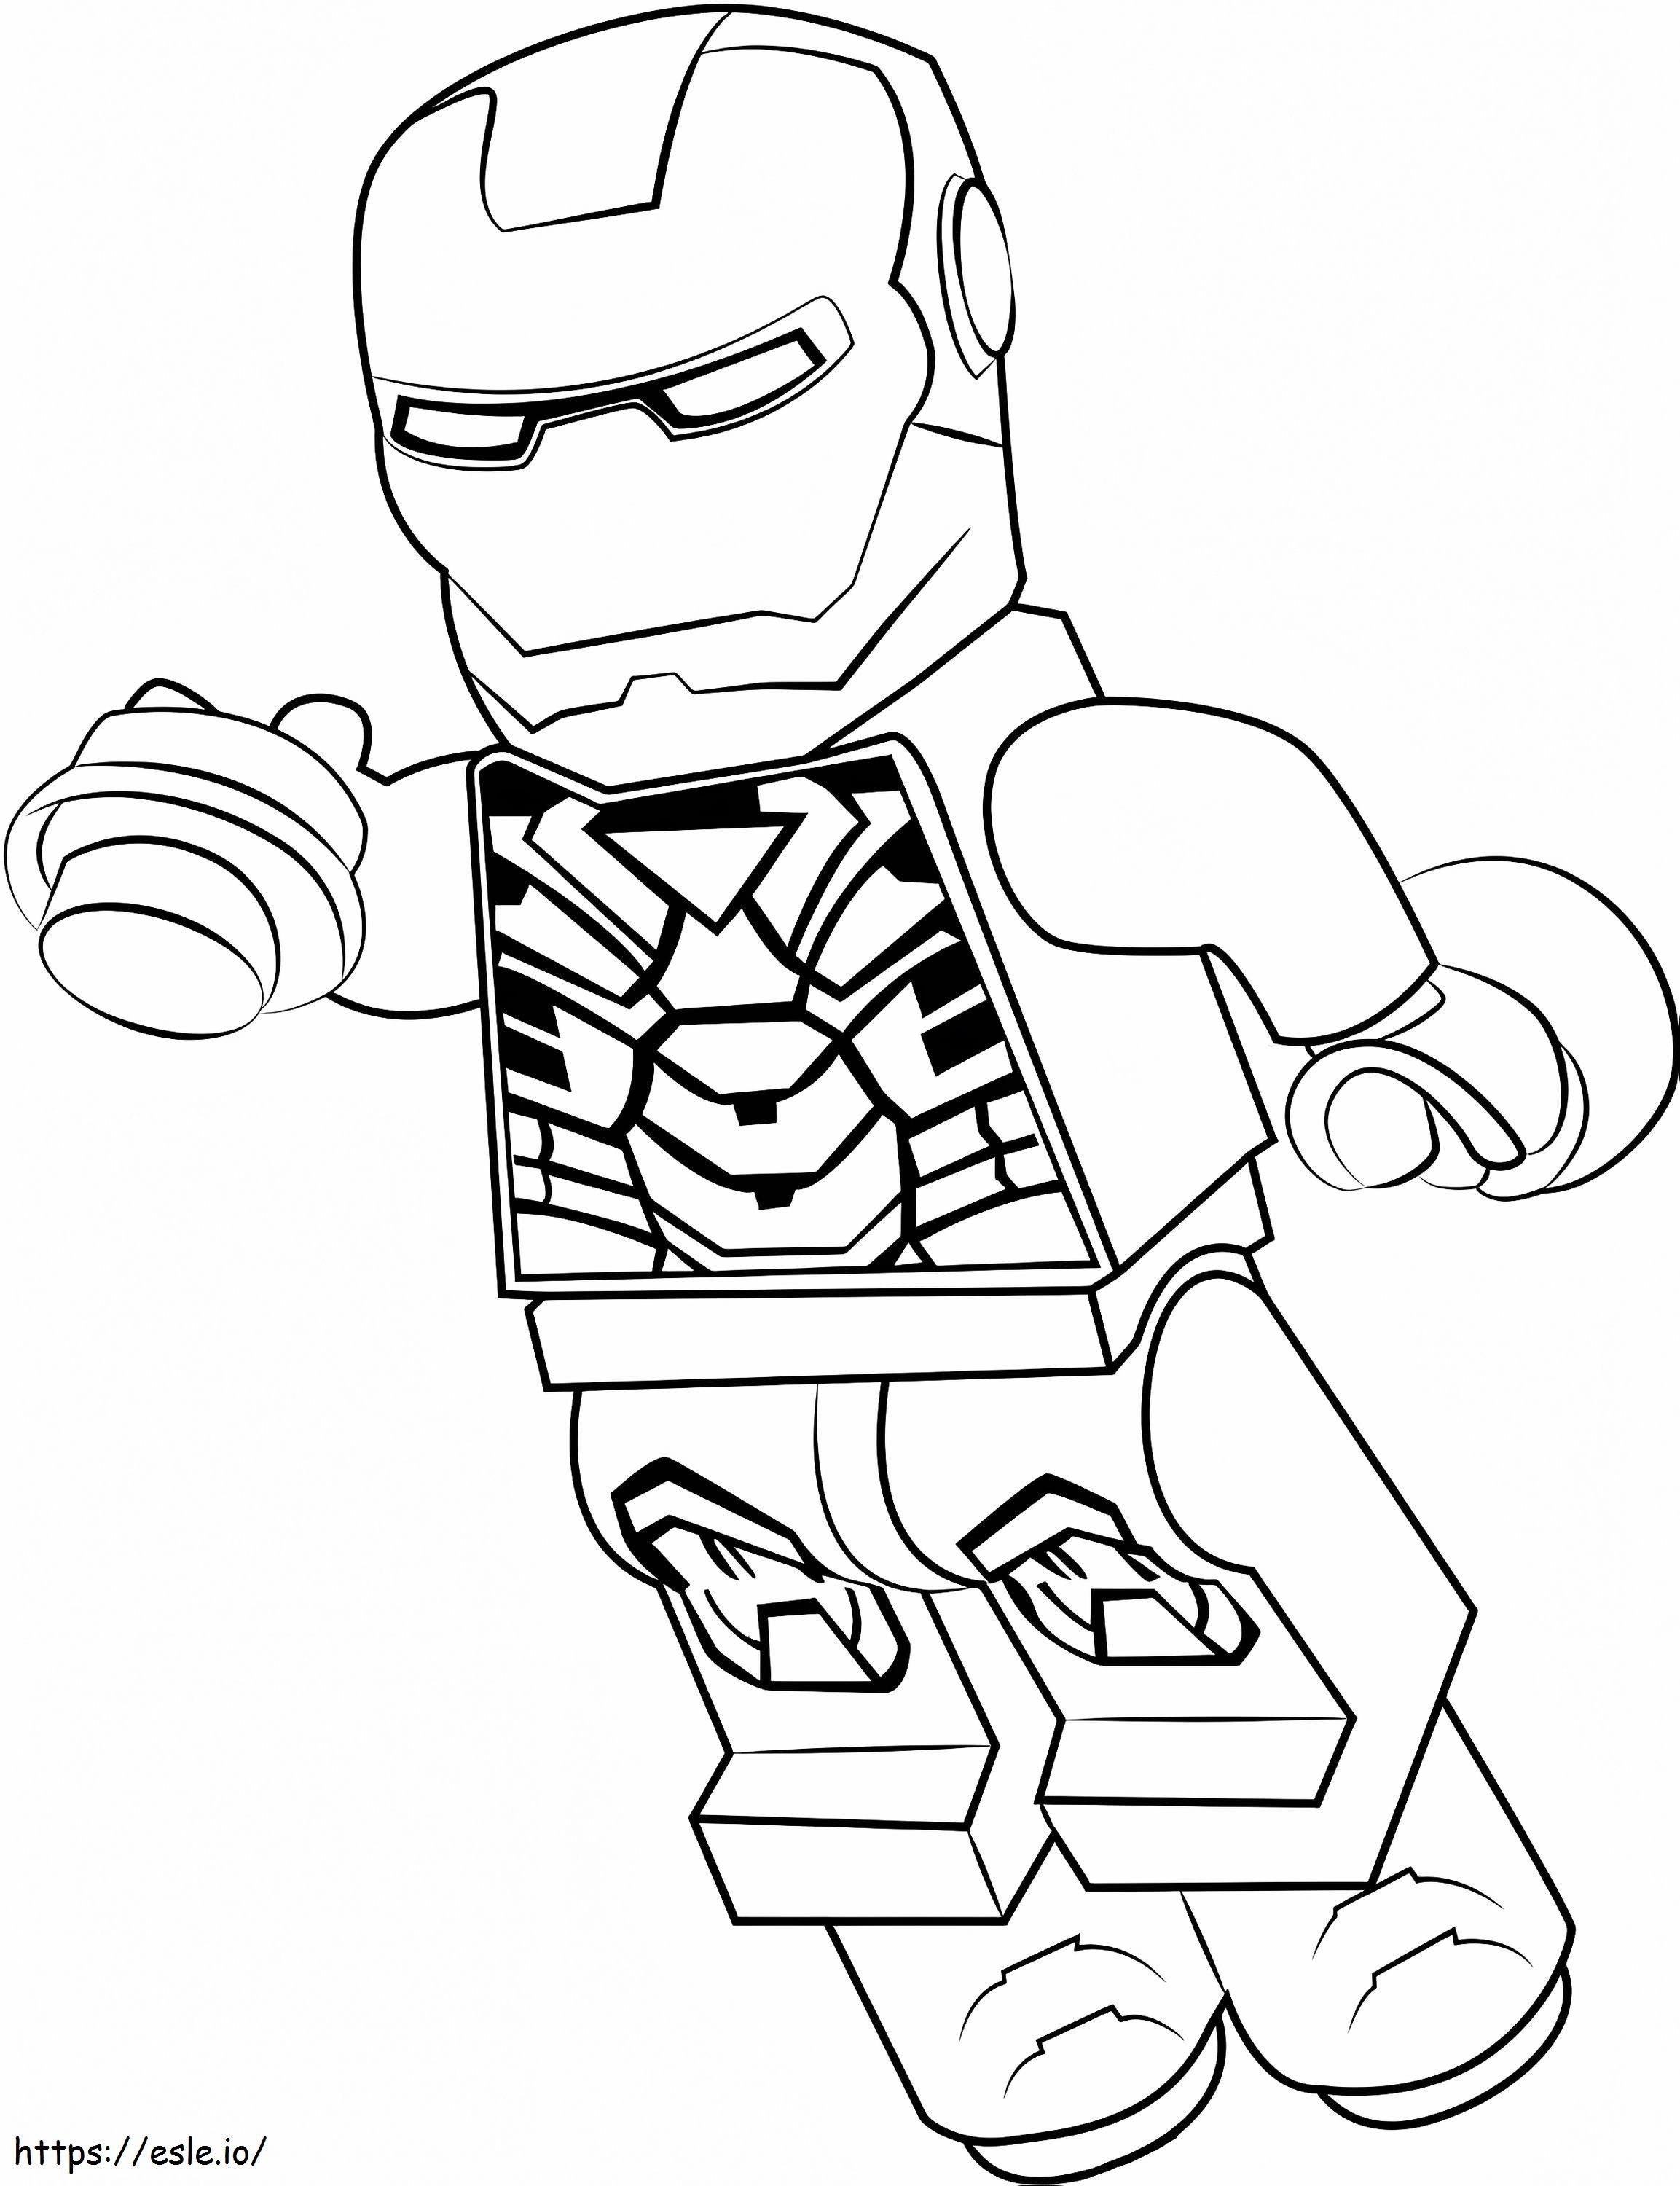 Cool Lego Iron Man coloring page